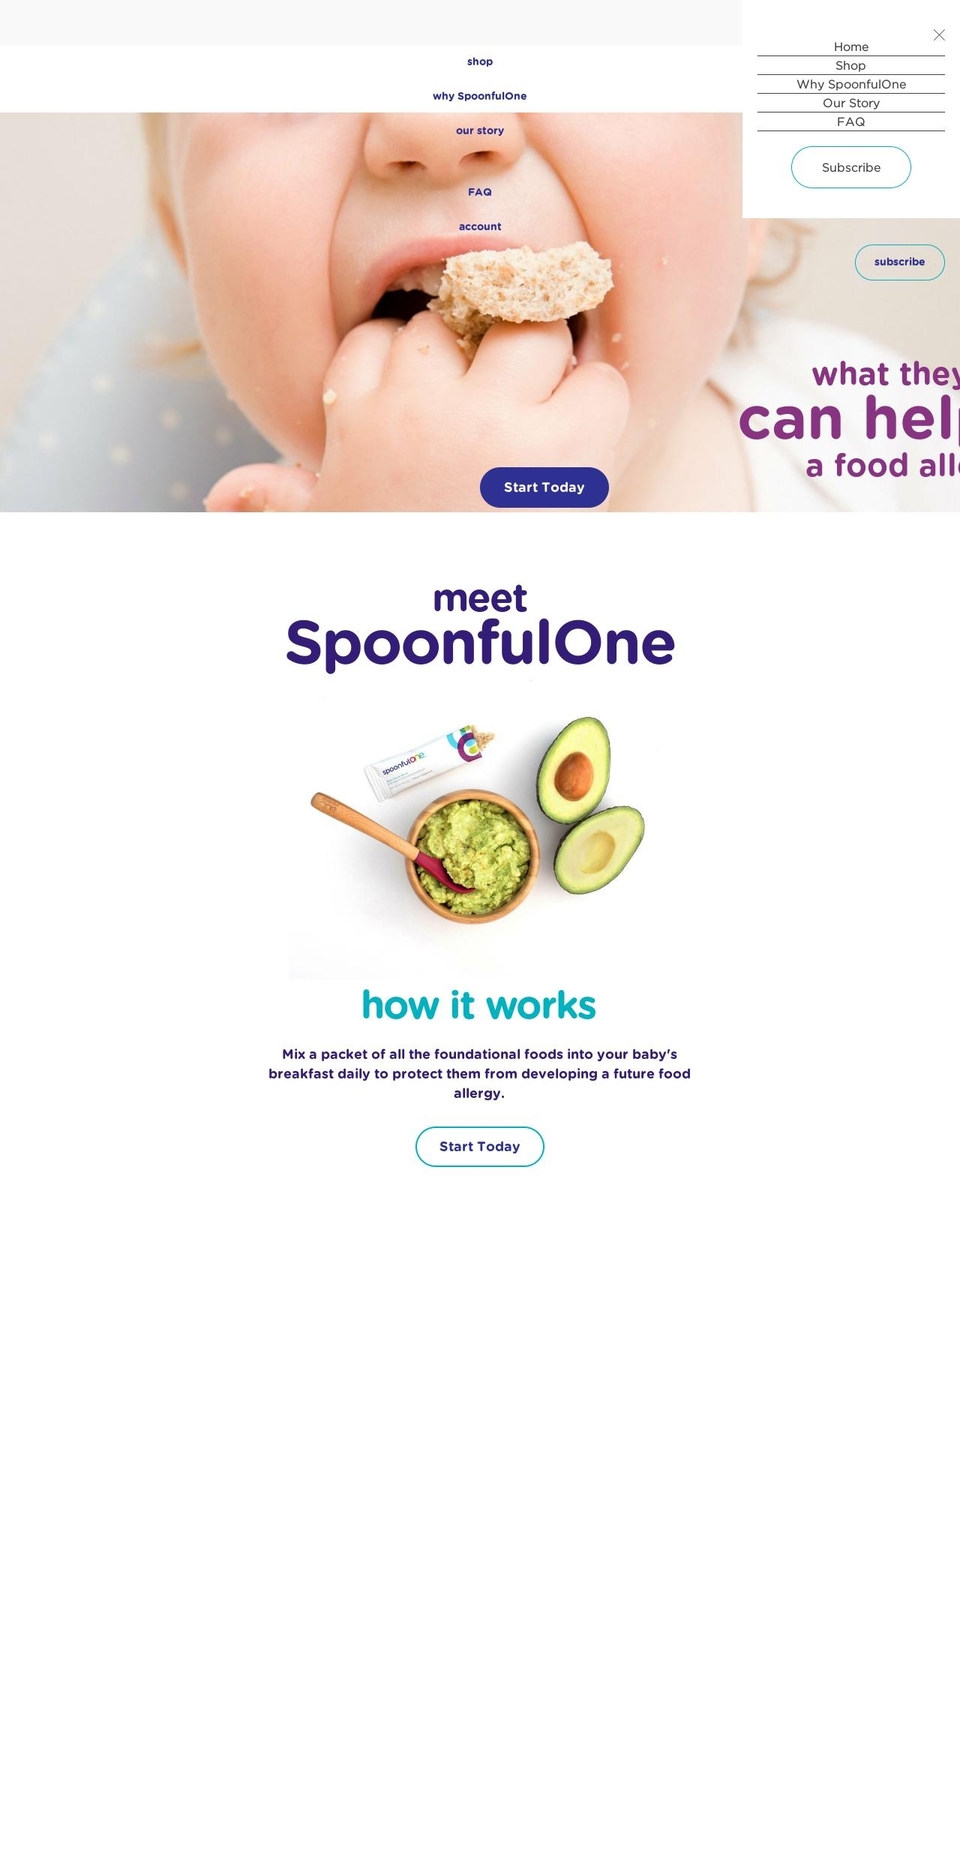 Production | BVA Shopify theme site example spoonfulone.com